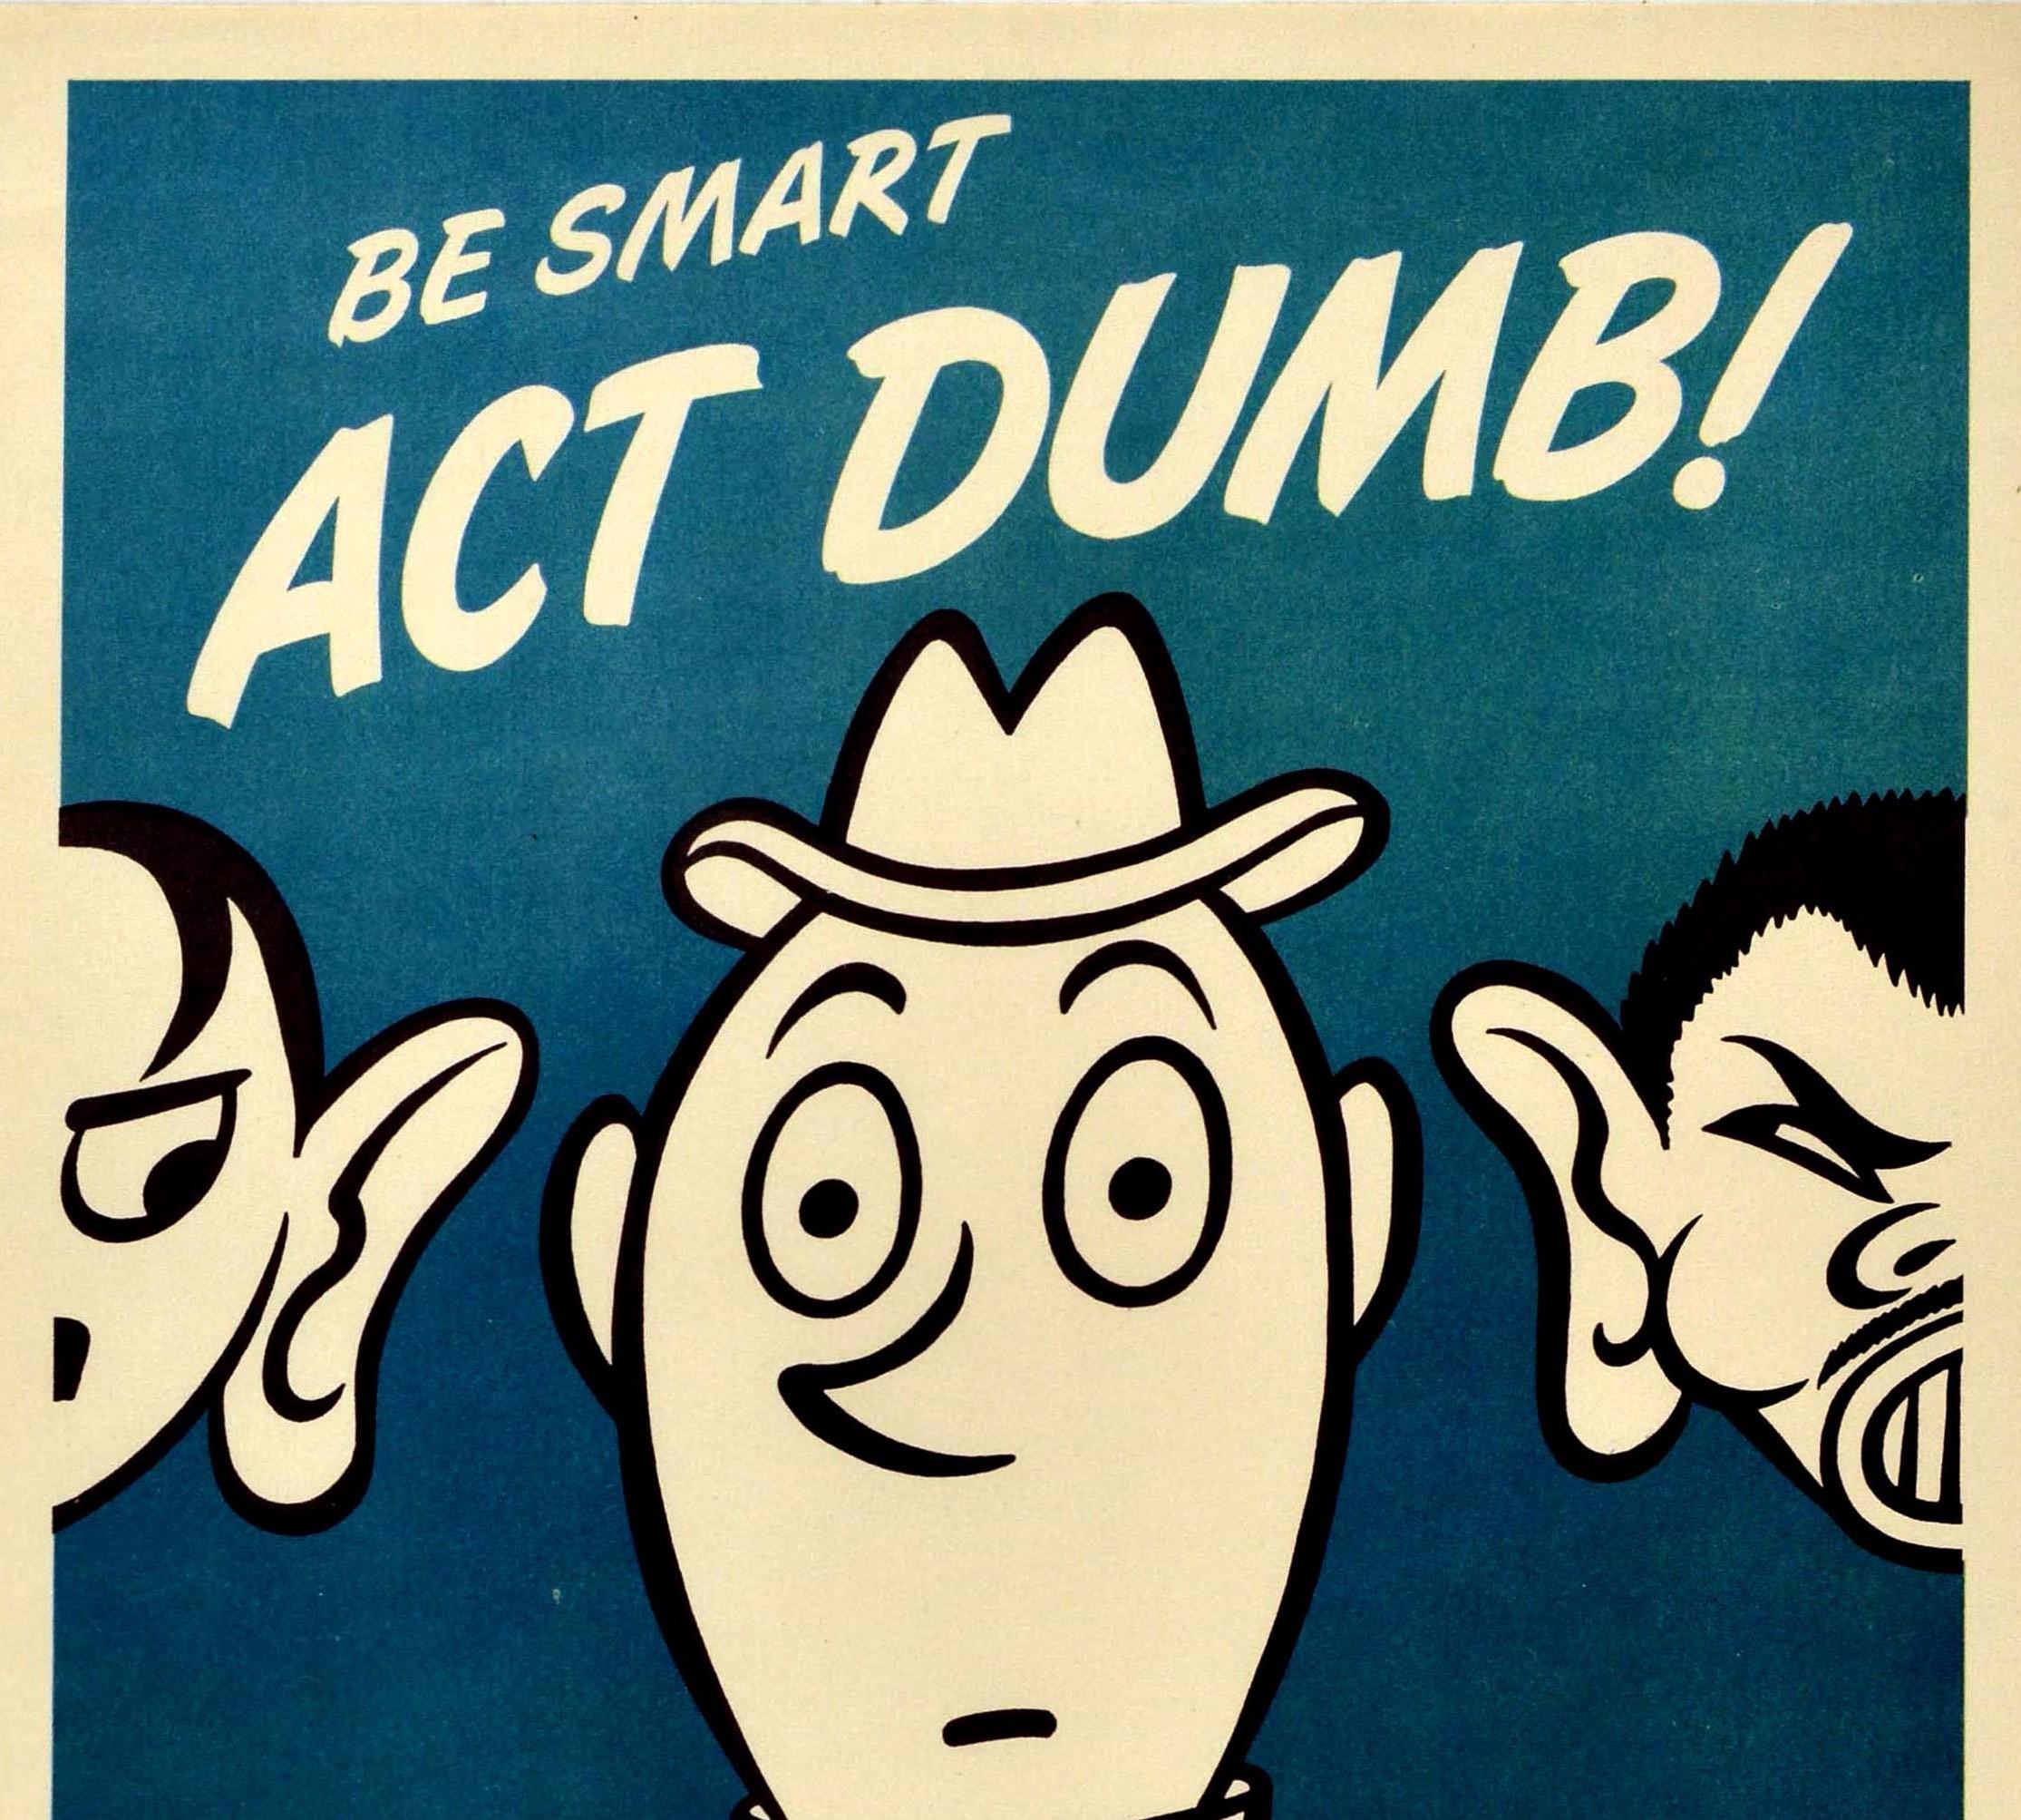 Original vintage World War Two propaganda poster - Be Smart Act Dumb! Loose Talk Can Cost Lives WWII - featuring cartoon style artwork depicting a man wearing a suit, bow tie and hat with wide open eyes and his mouth shut between a caricature of a